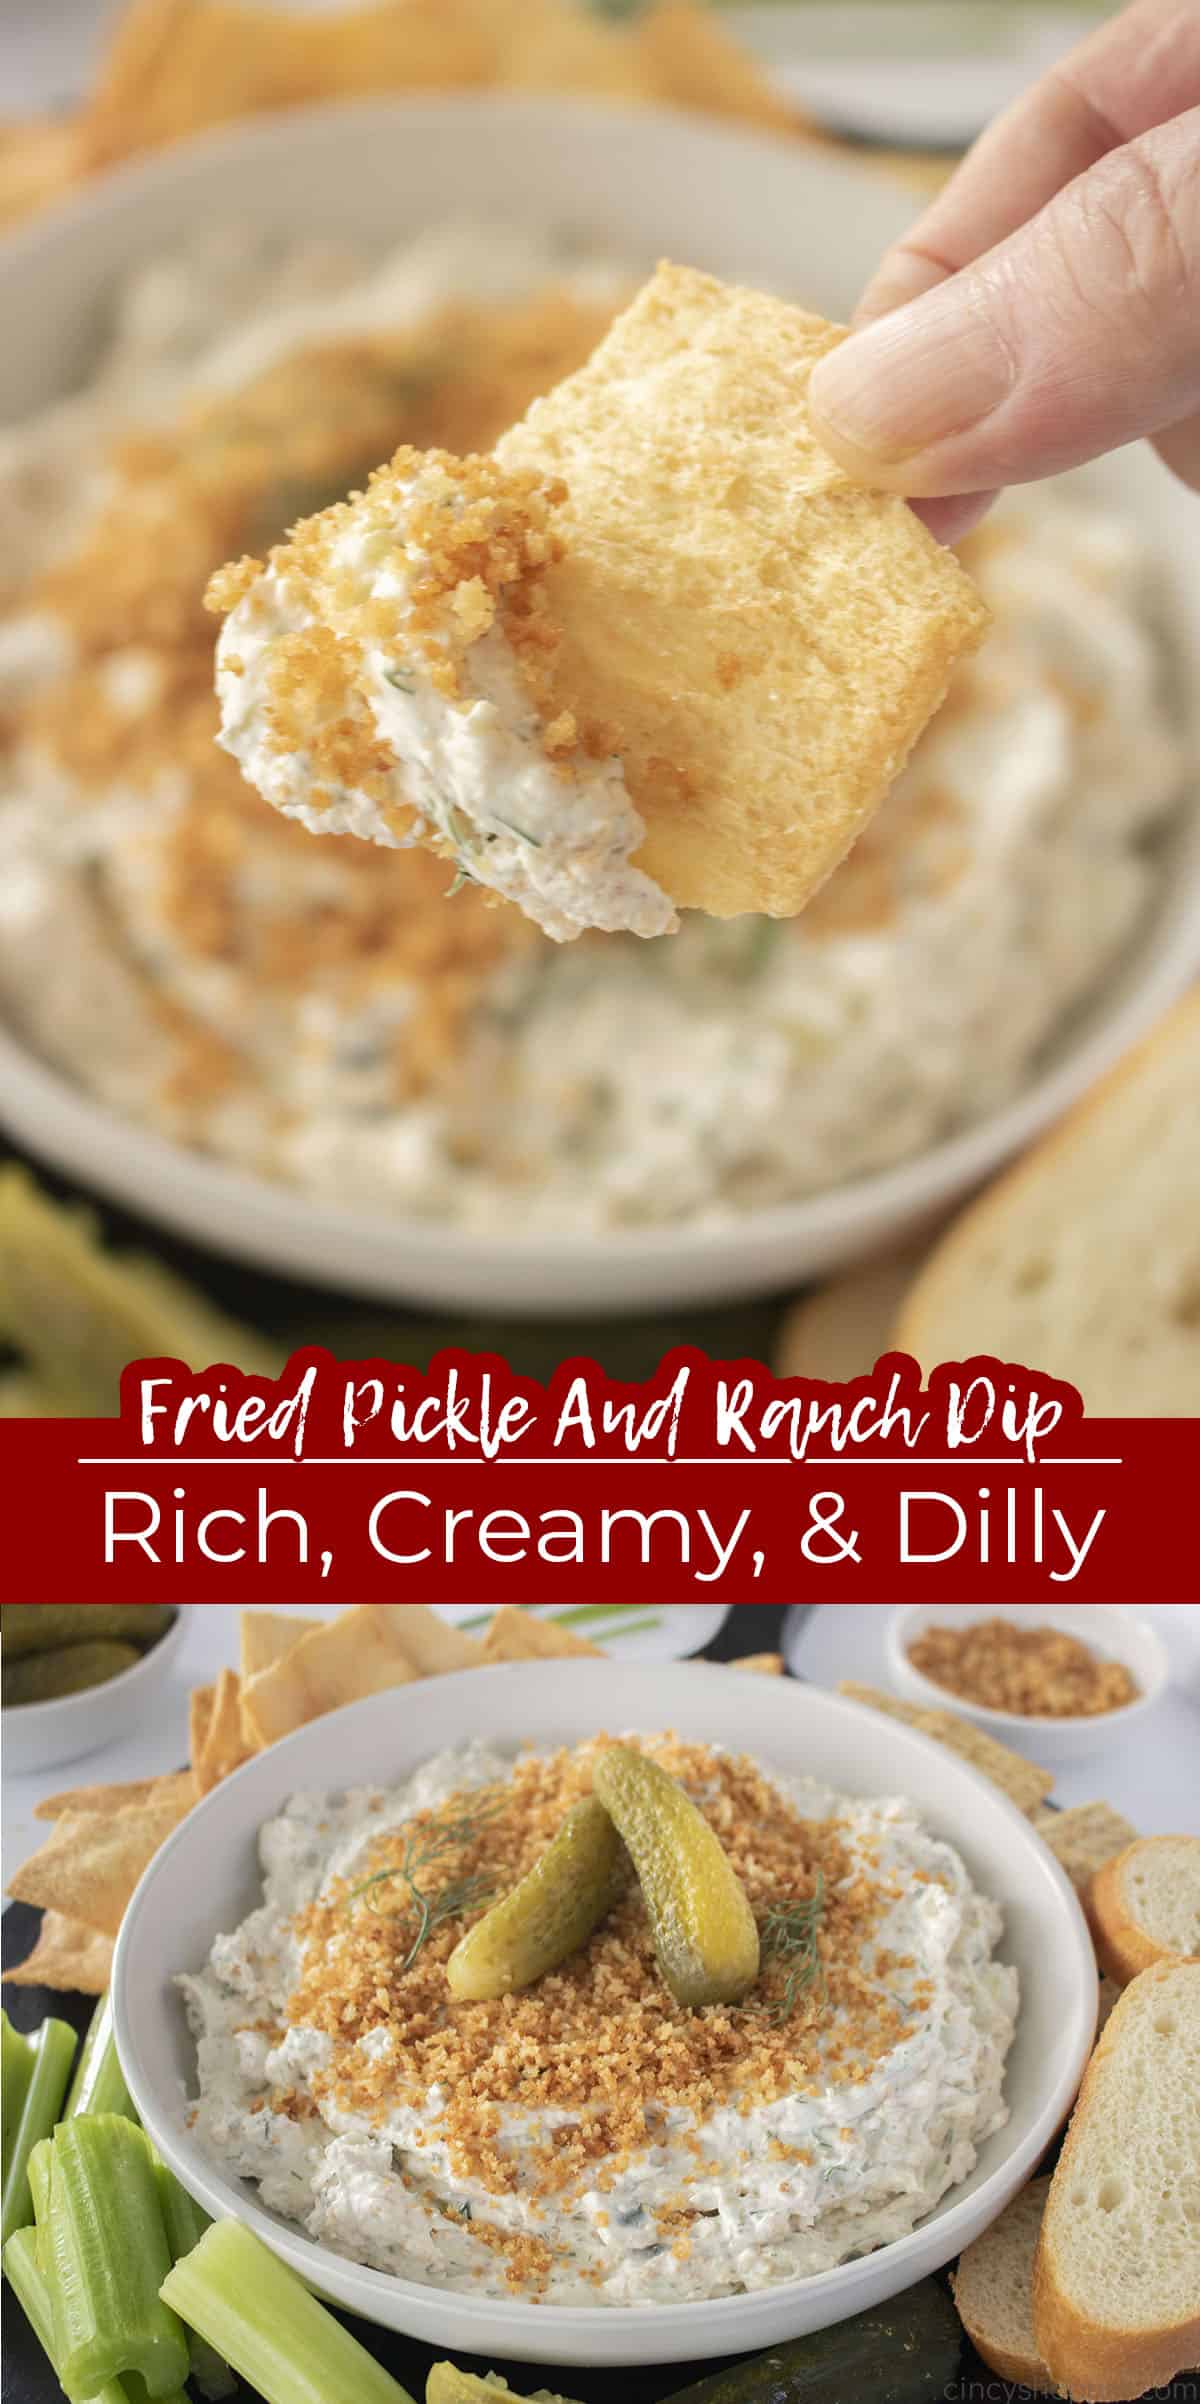 Fried Pickle and Ranch Dip Rich, Creamy, & Dilly long pin